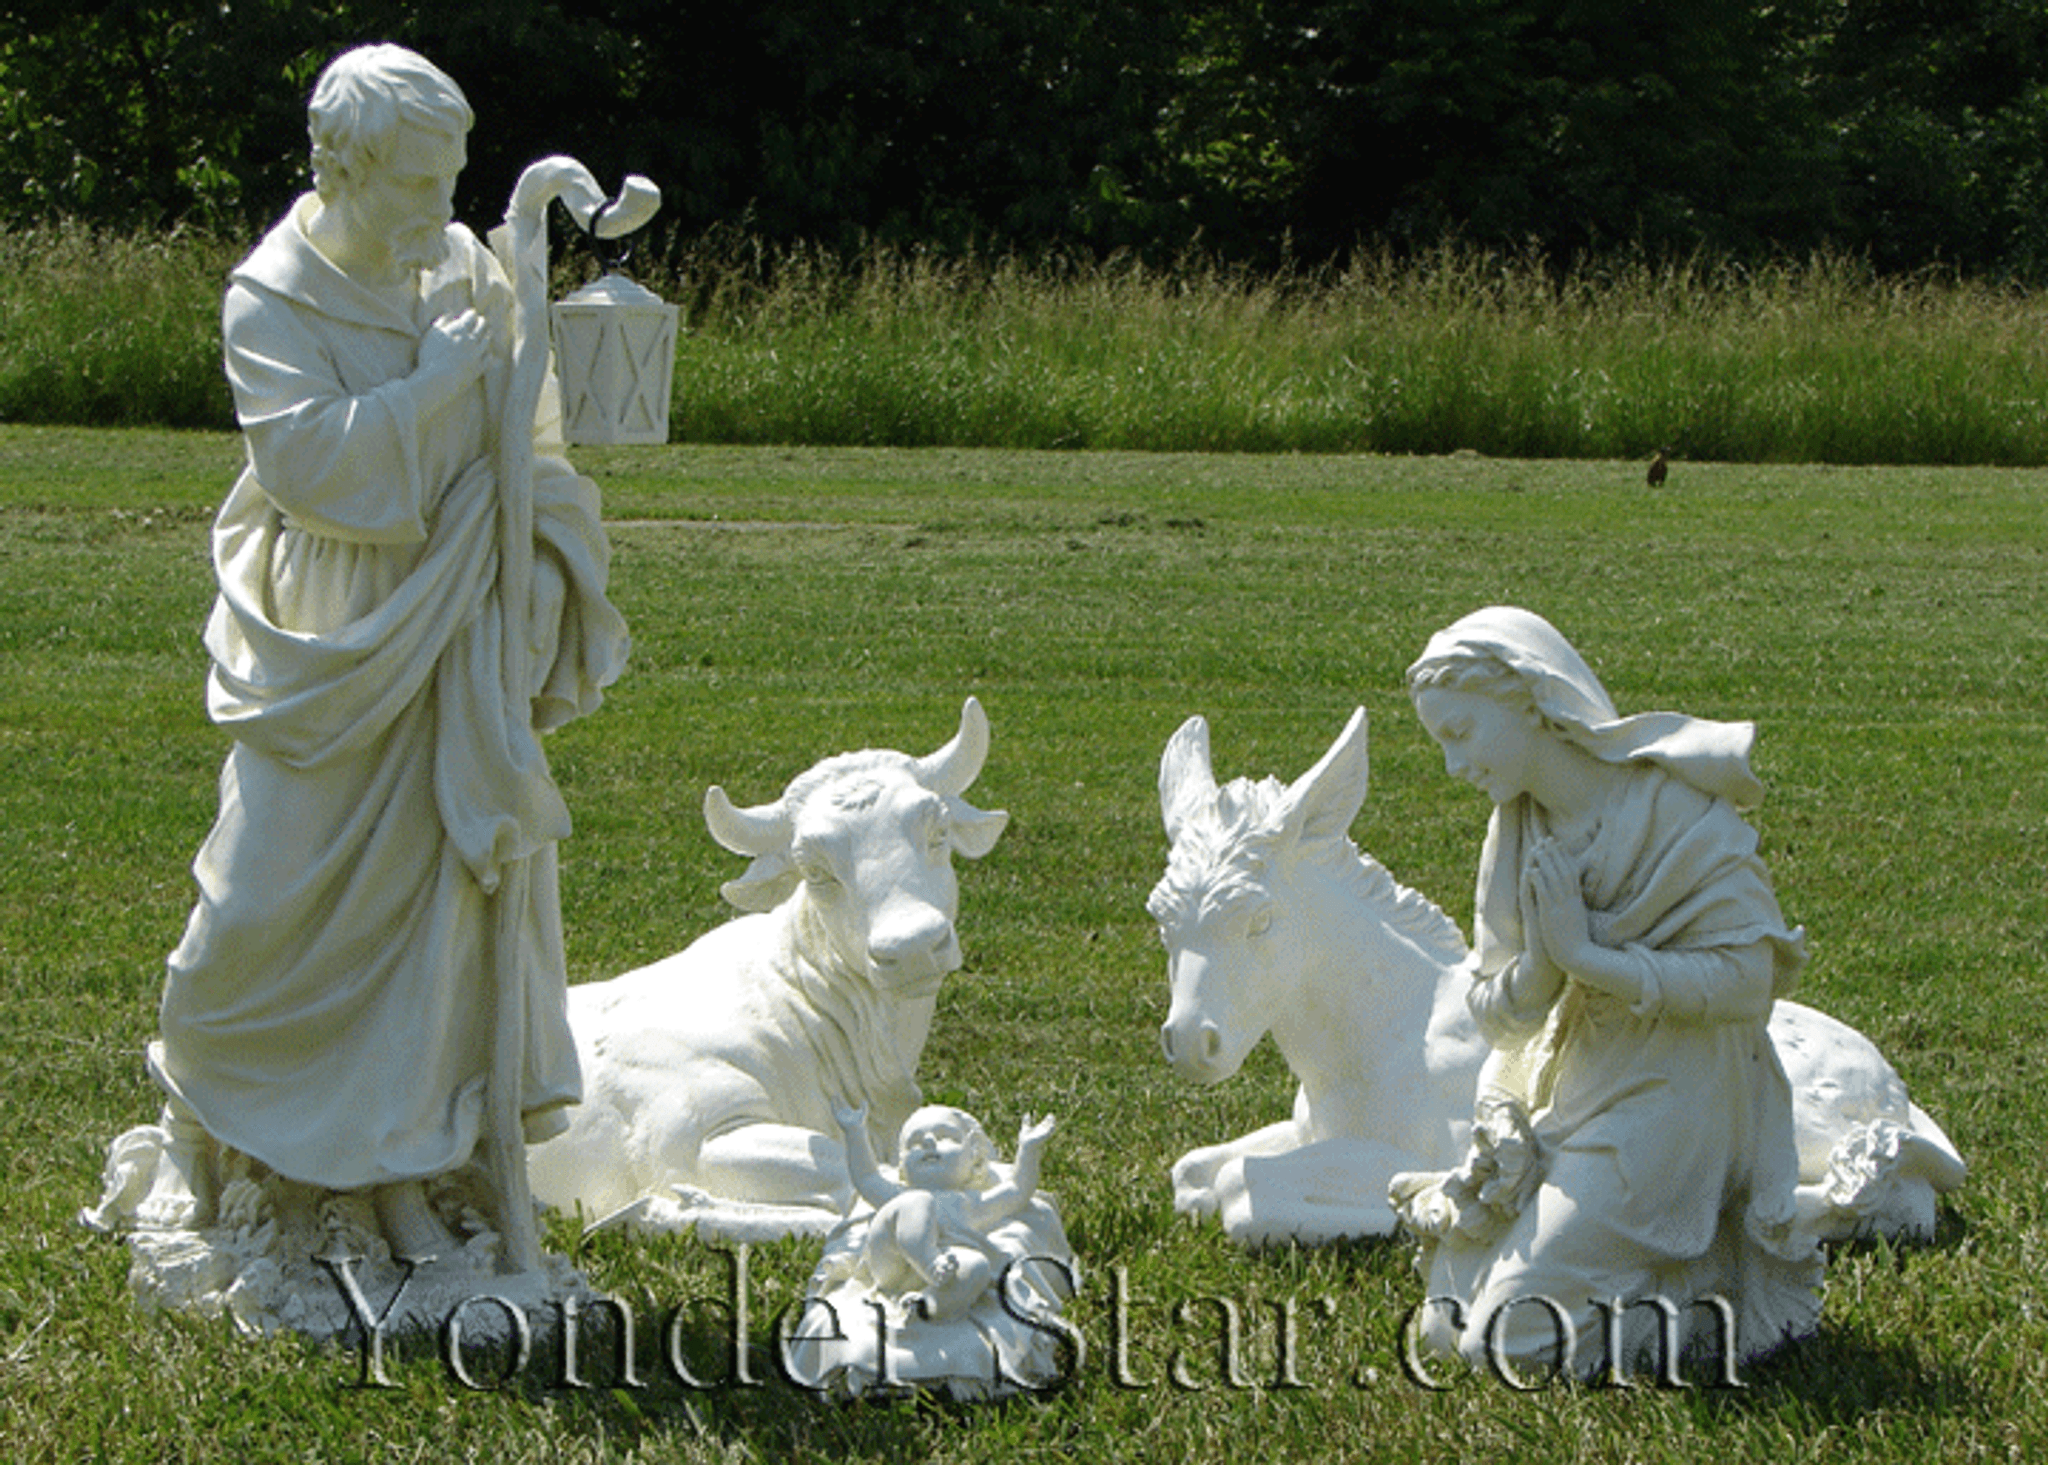 Outdoor Nativity Set with Animals 5 pcs Yonder Star